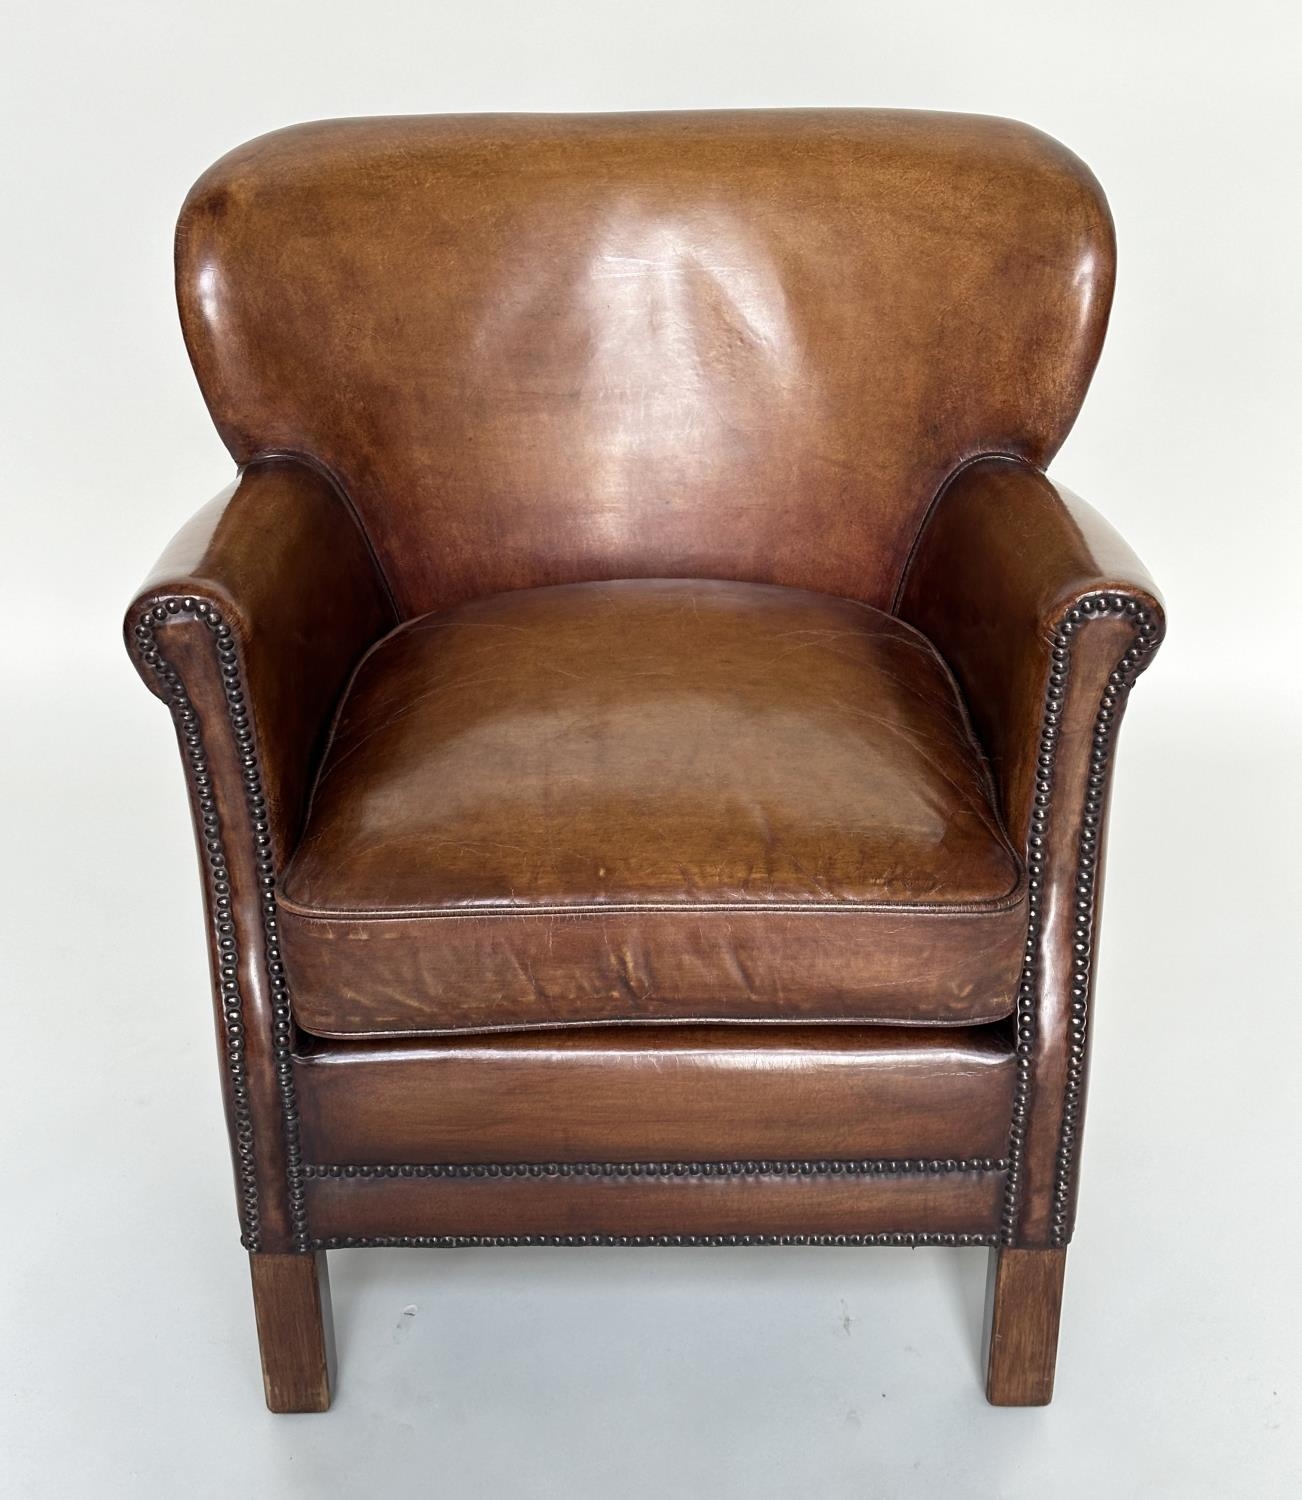 LITTLE PROFESSOR ARMCHAIR, in the manner of Timothy Oulton soft natural mid brown leather upholstery - Image 9 of 9